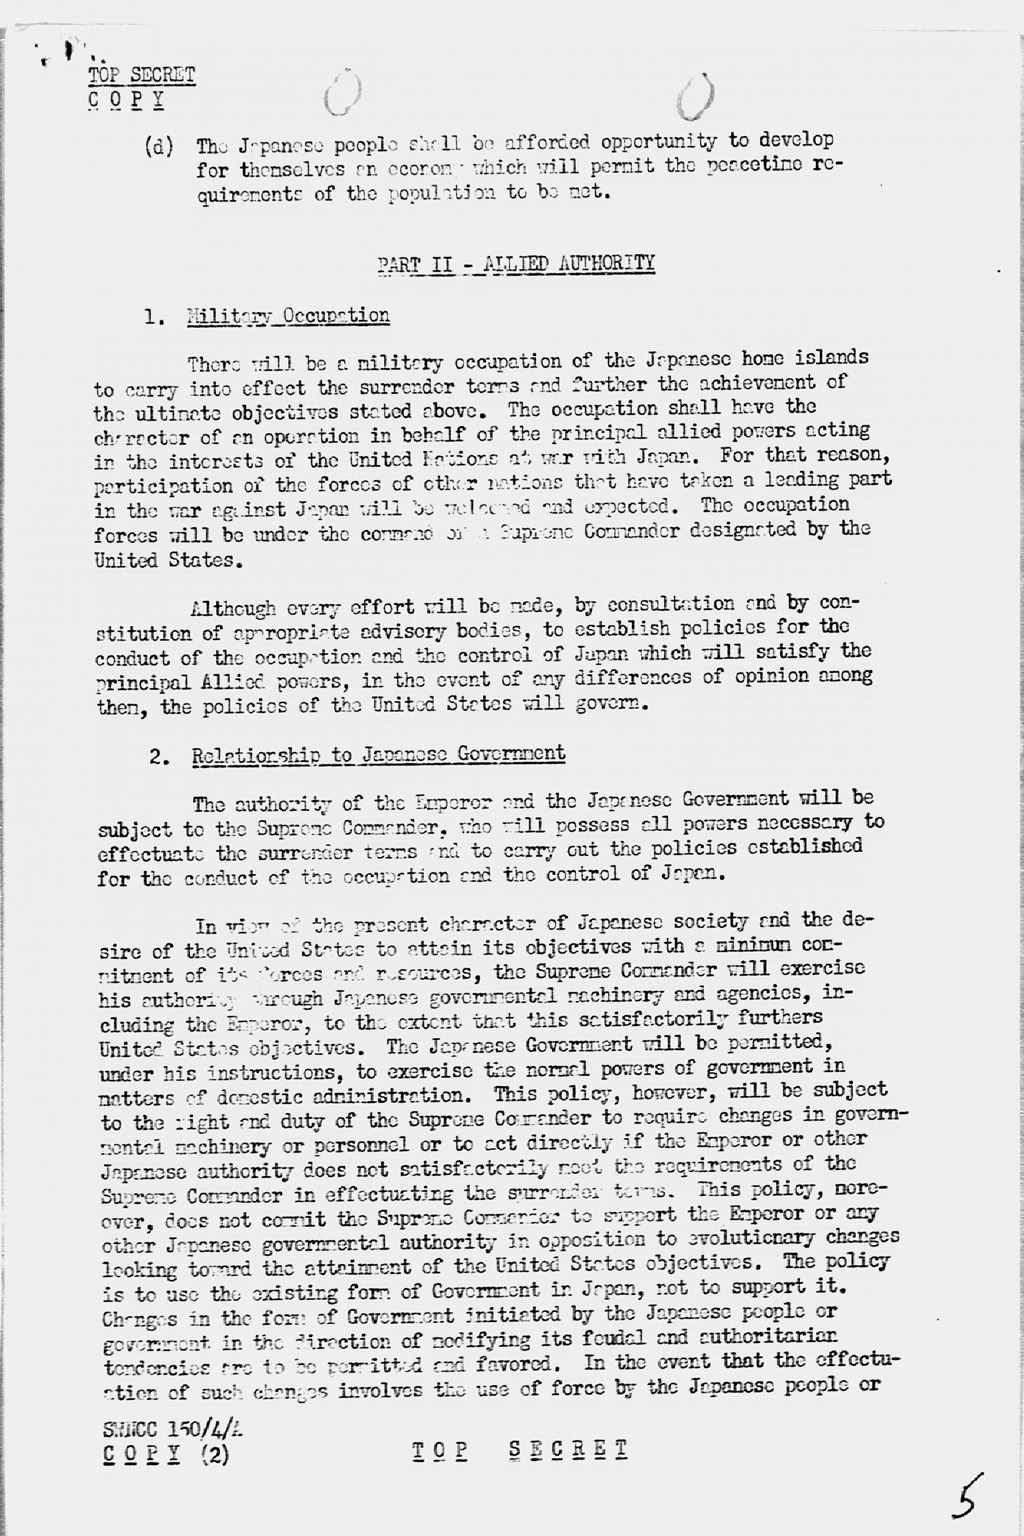 U.S. Initial Post-Surrender Policy for Japan (SWNCC150/4/A)(larger)